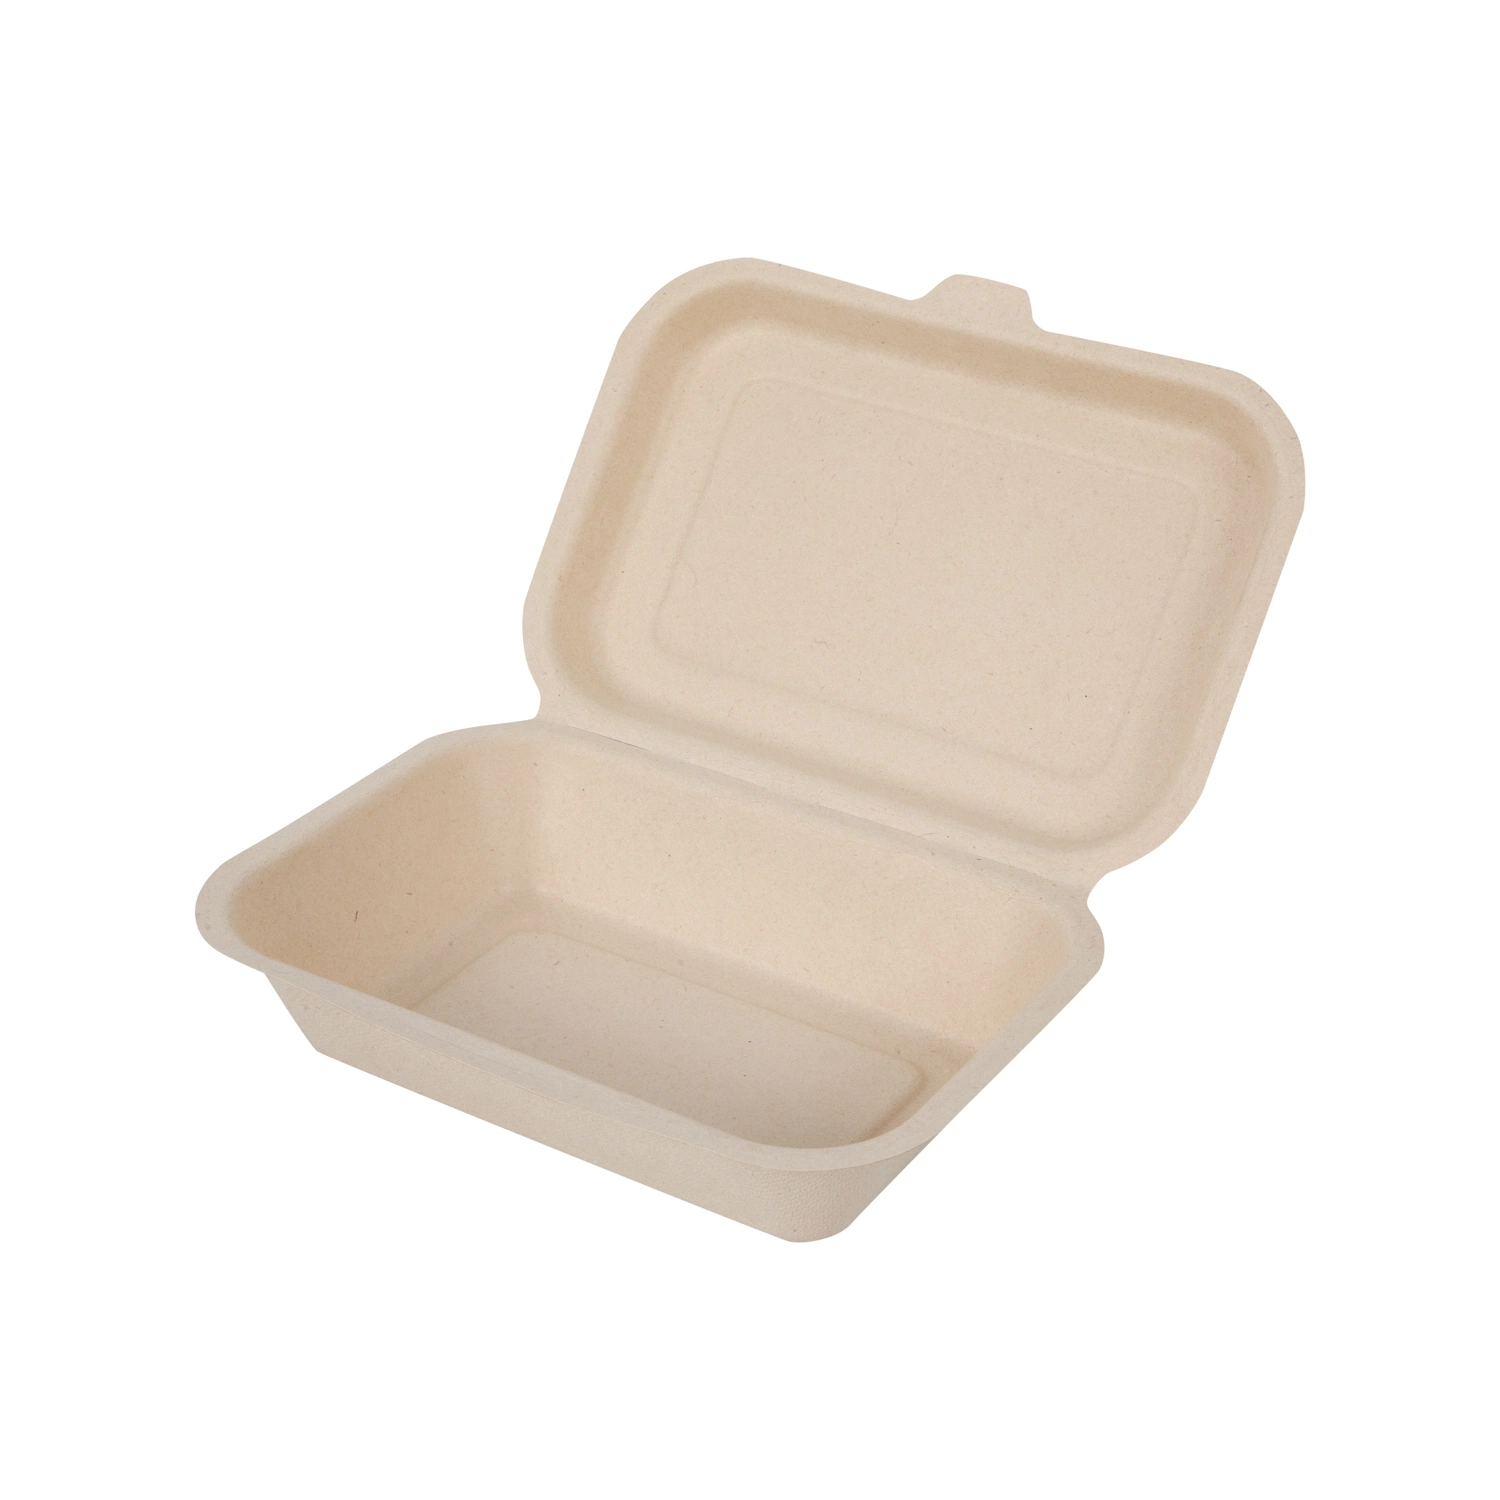 Sugarcane Bagasse Disposable Takeout Food Container for Microwave Plate Clamshell Tray Tableware